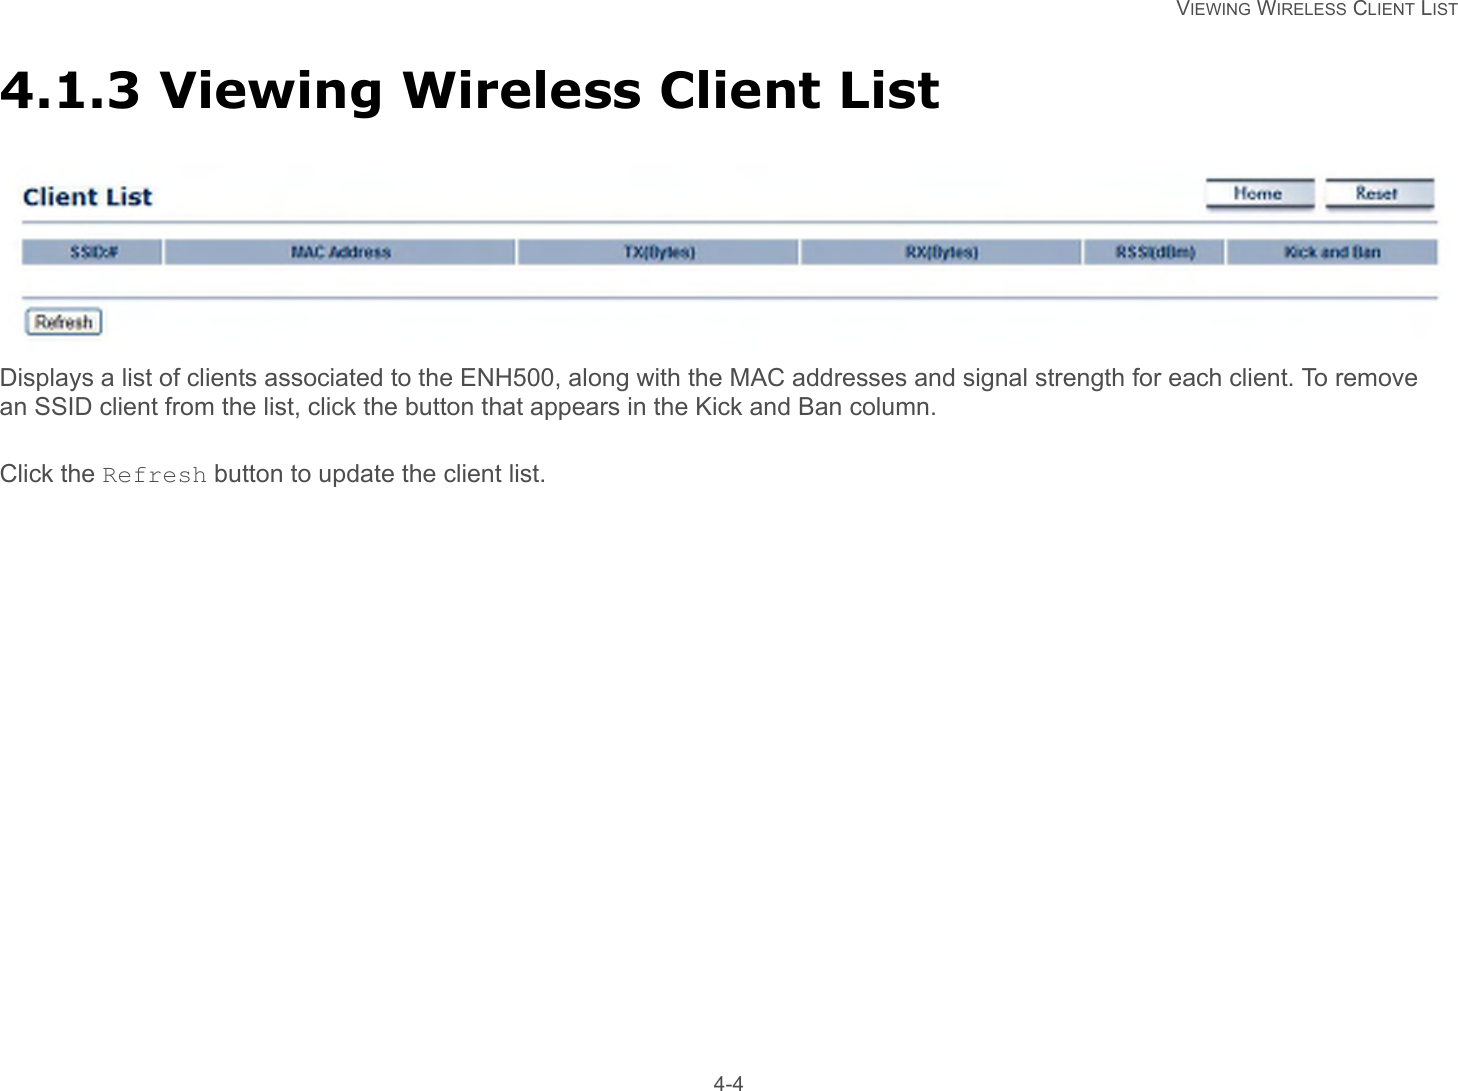   VIEWING WIRELESS CLIENT LIST 4-44.1.3 Viewing Wireless Client ListDisplays a list of clients associated to the ENH500, along with the MAC addresses and signal strength for each client. To remove an SSID client from the list, click the button that appears in the Kick and Ban column.Click the Refresh button to update the client list.